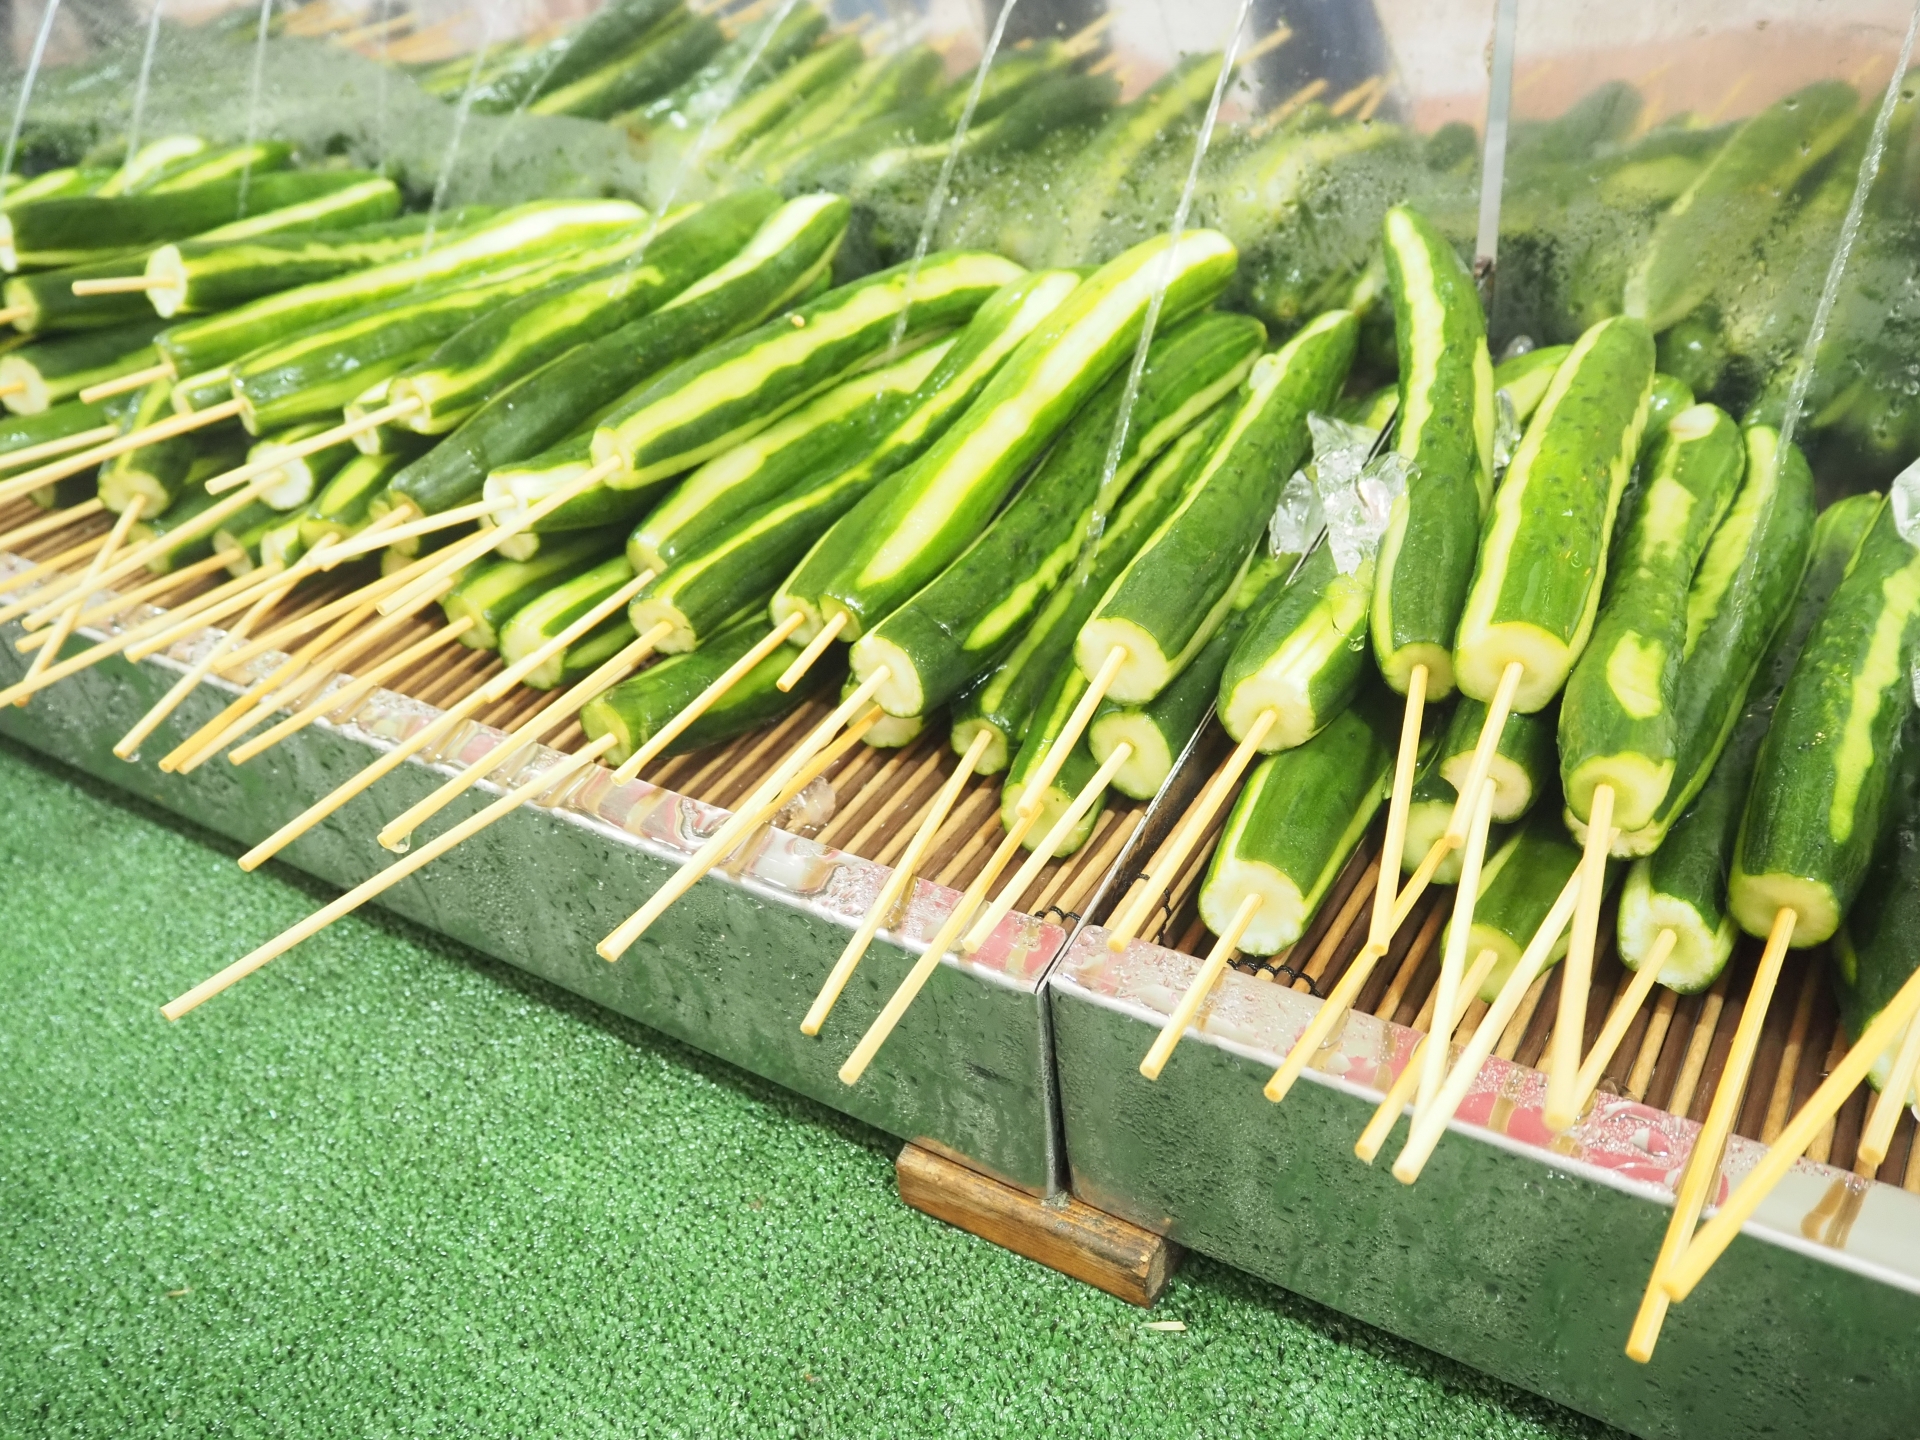 chilled cucumber at a summer festival in Japan